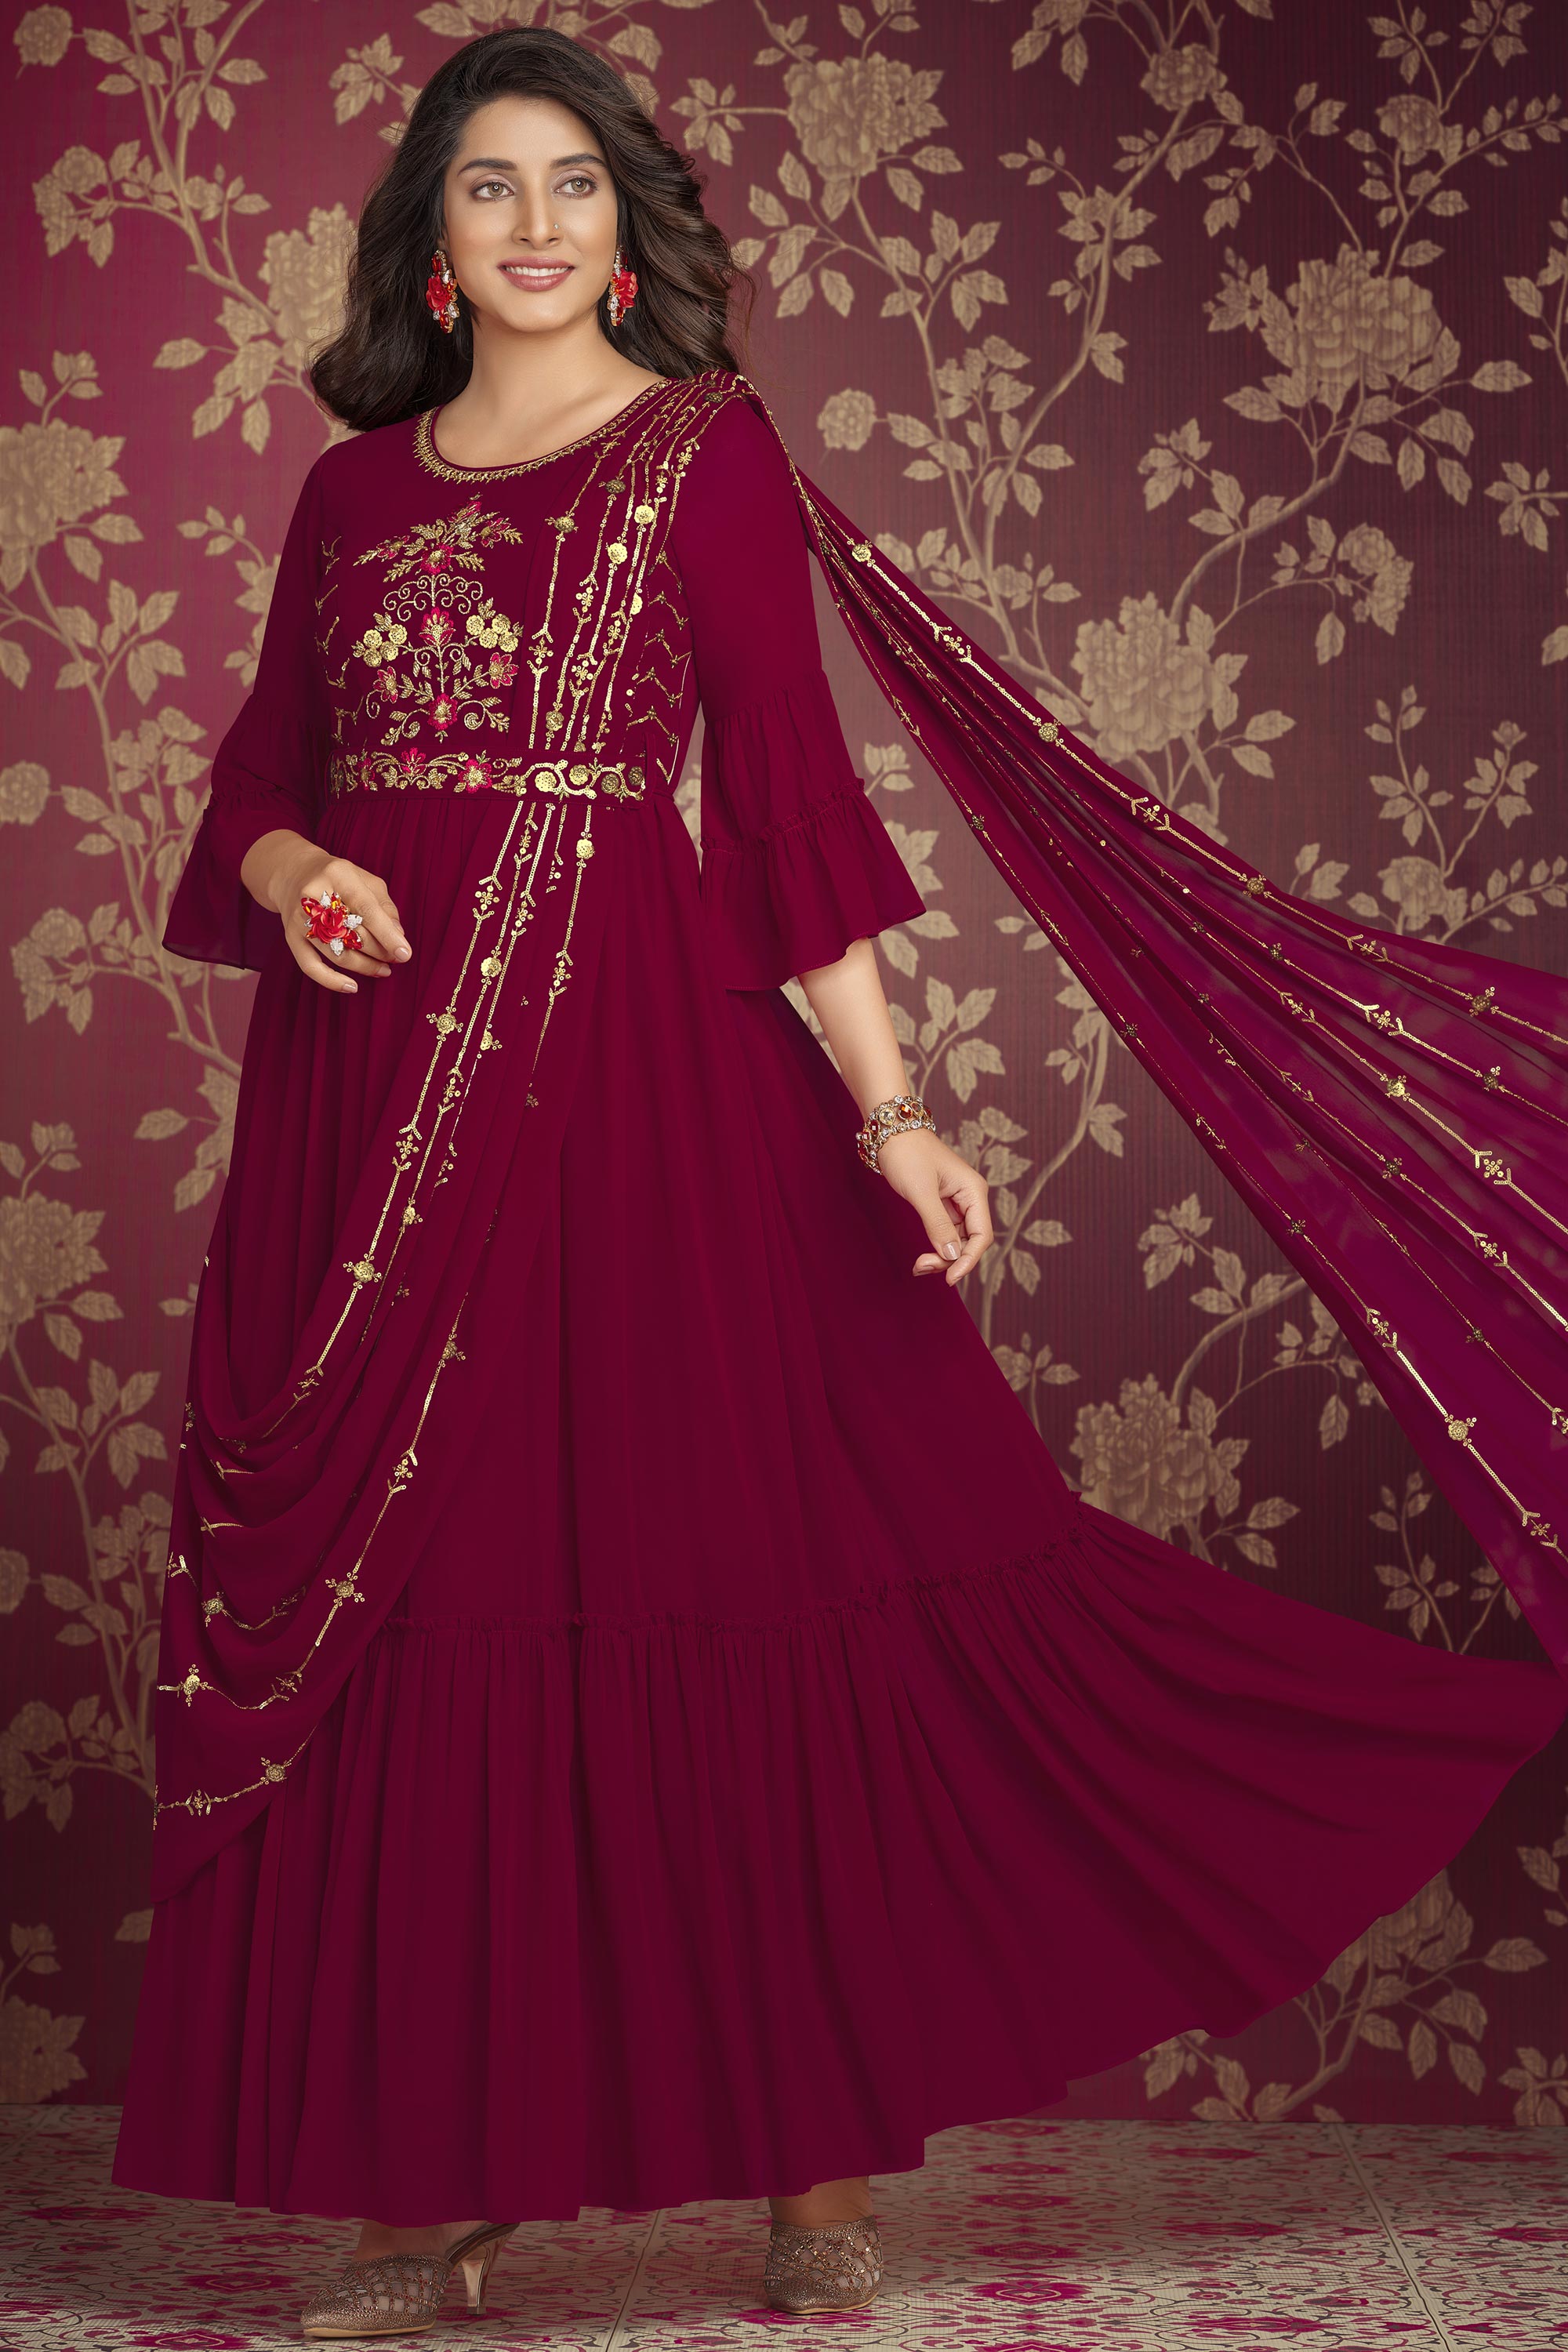 Shoulder off evening dress - S size in maroon colour, Women's Fashion,  Dresses & Sets, Evening Dresses & Gowns on Carousell